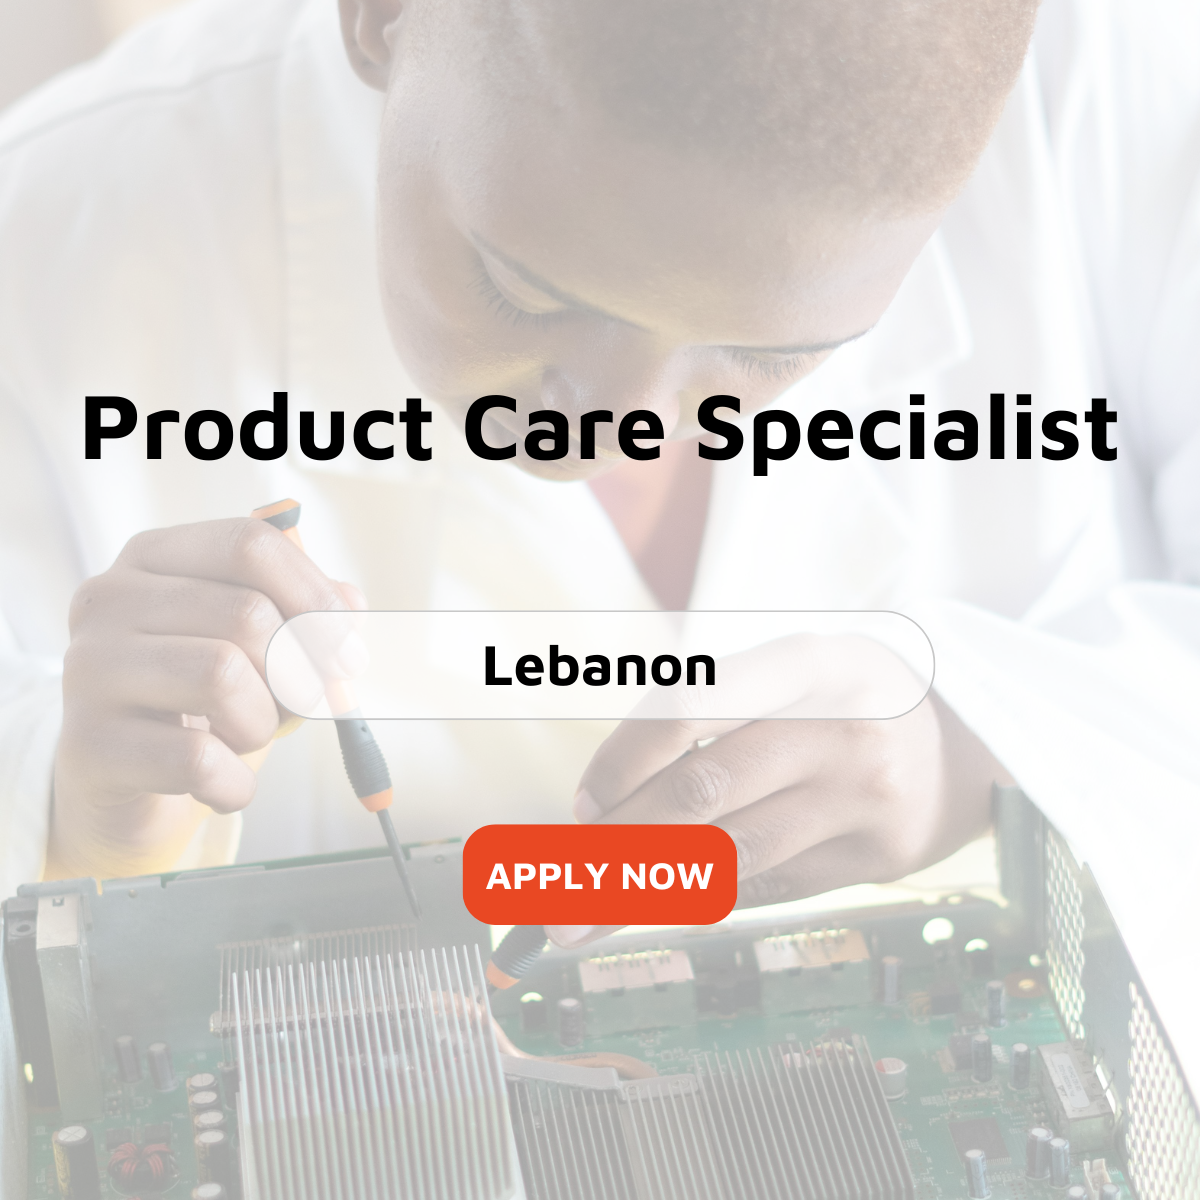 Product Care Specialist